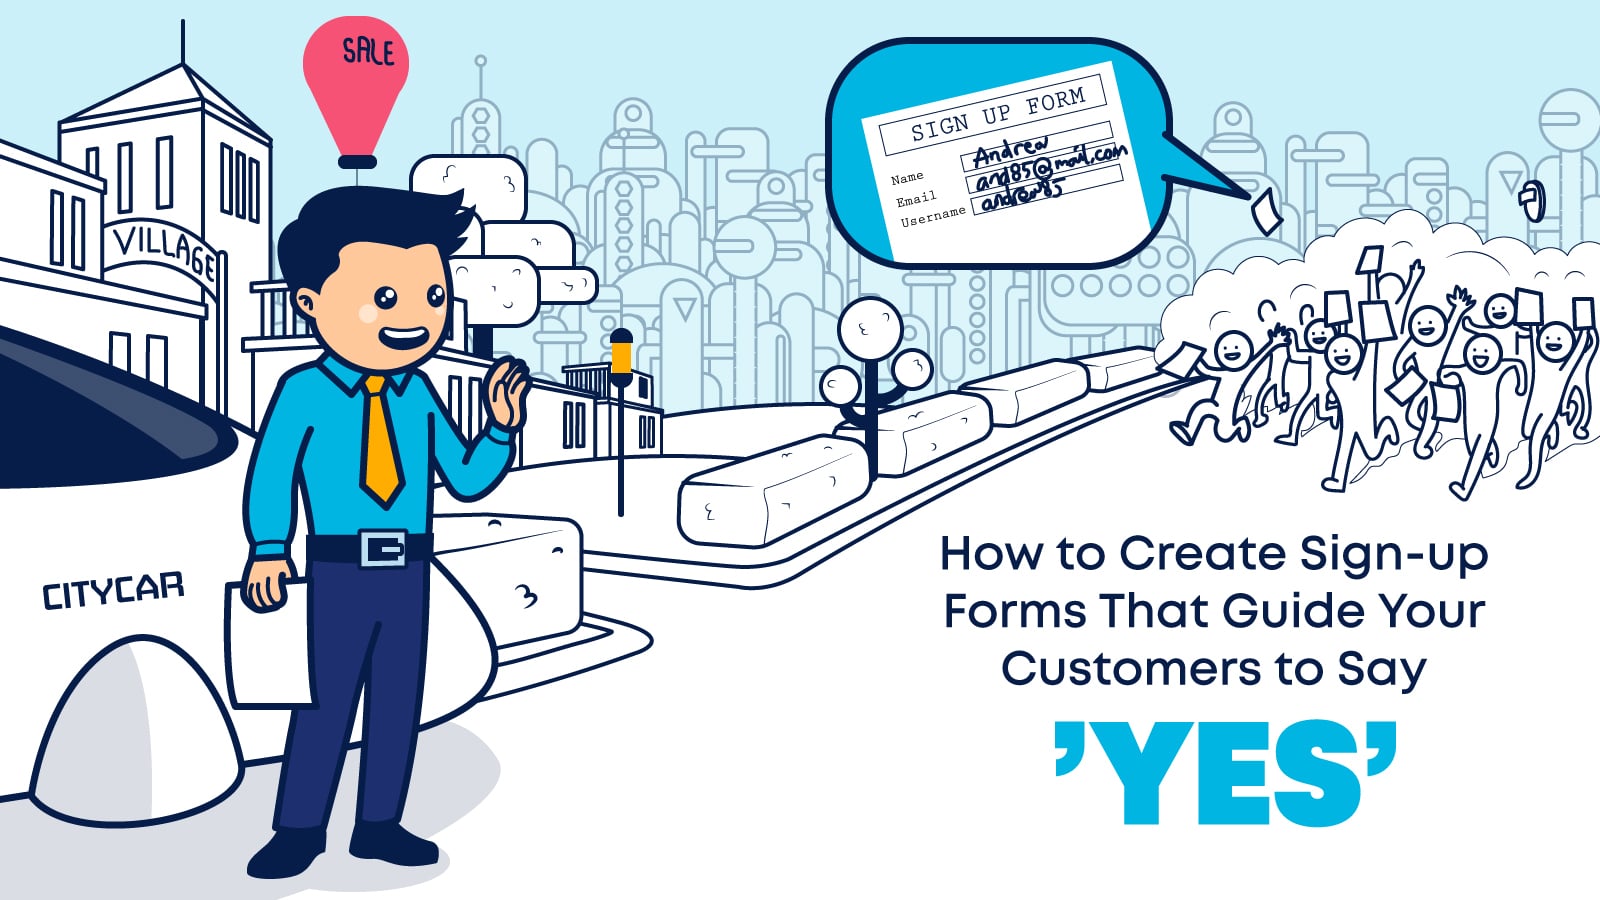 Creating sign-up forms your customers can't resist